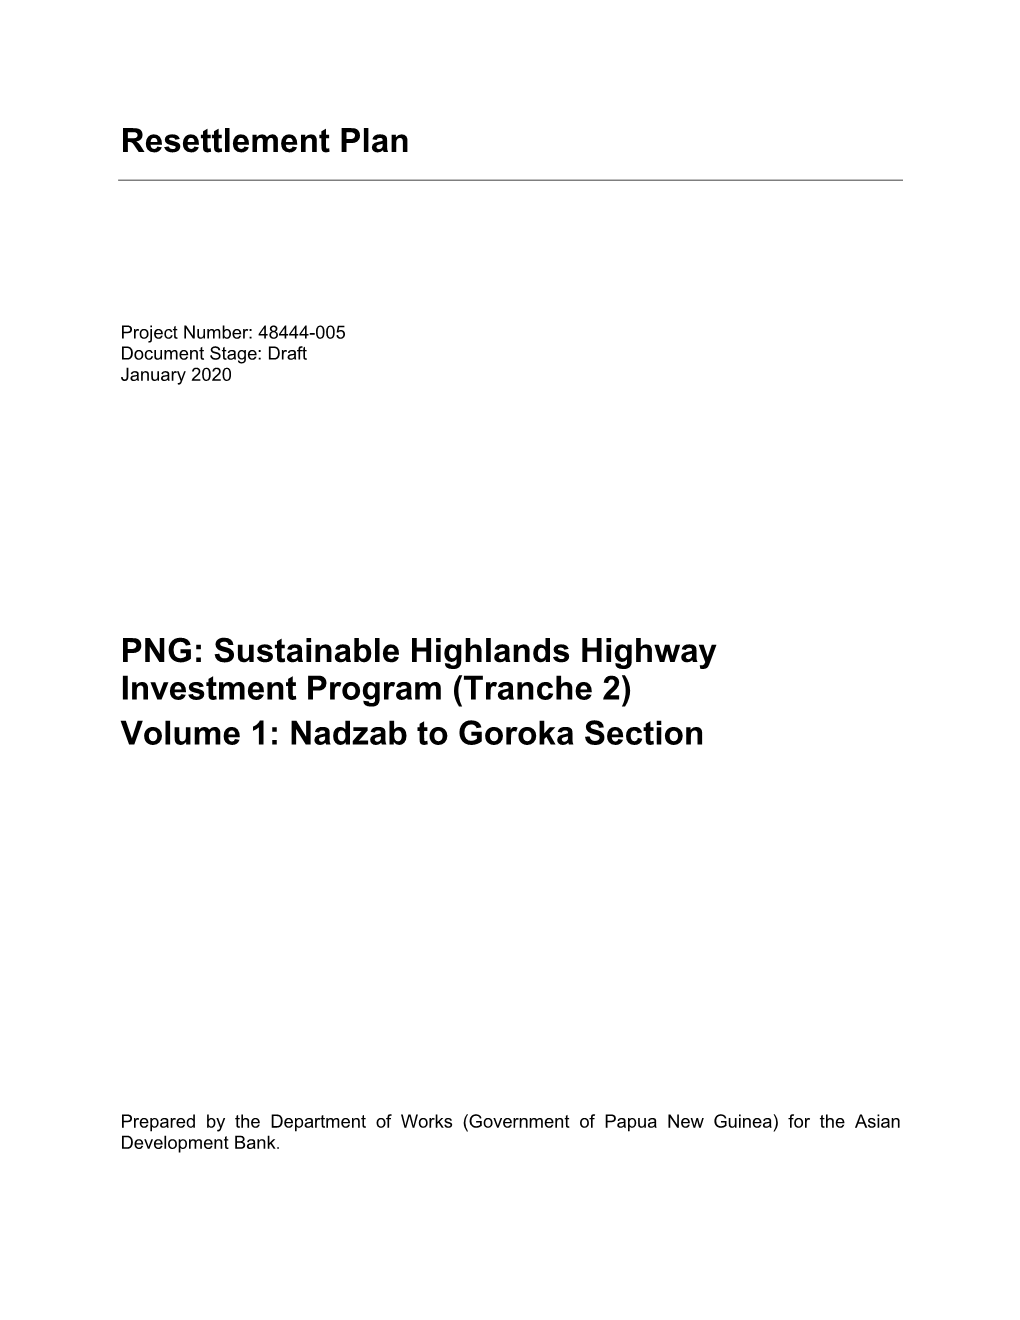 PNG: Sustainable Highlands Highway Investment Program (Tranche 2) Volume 1: Nadzab to Goroka Section